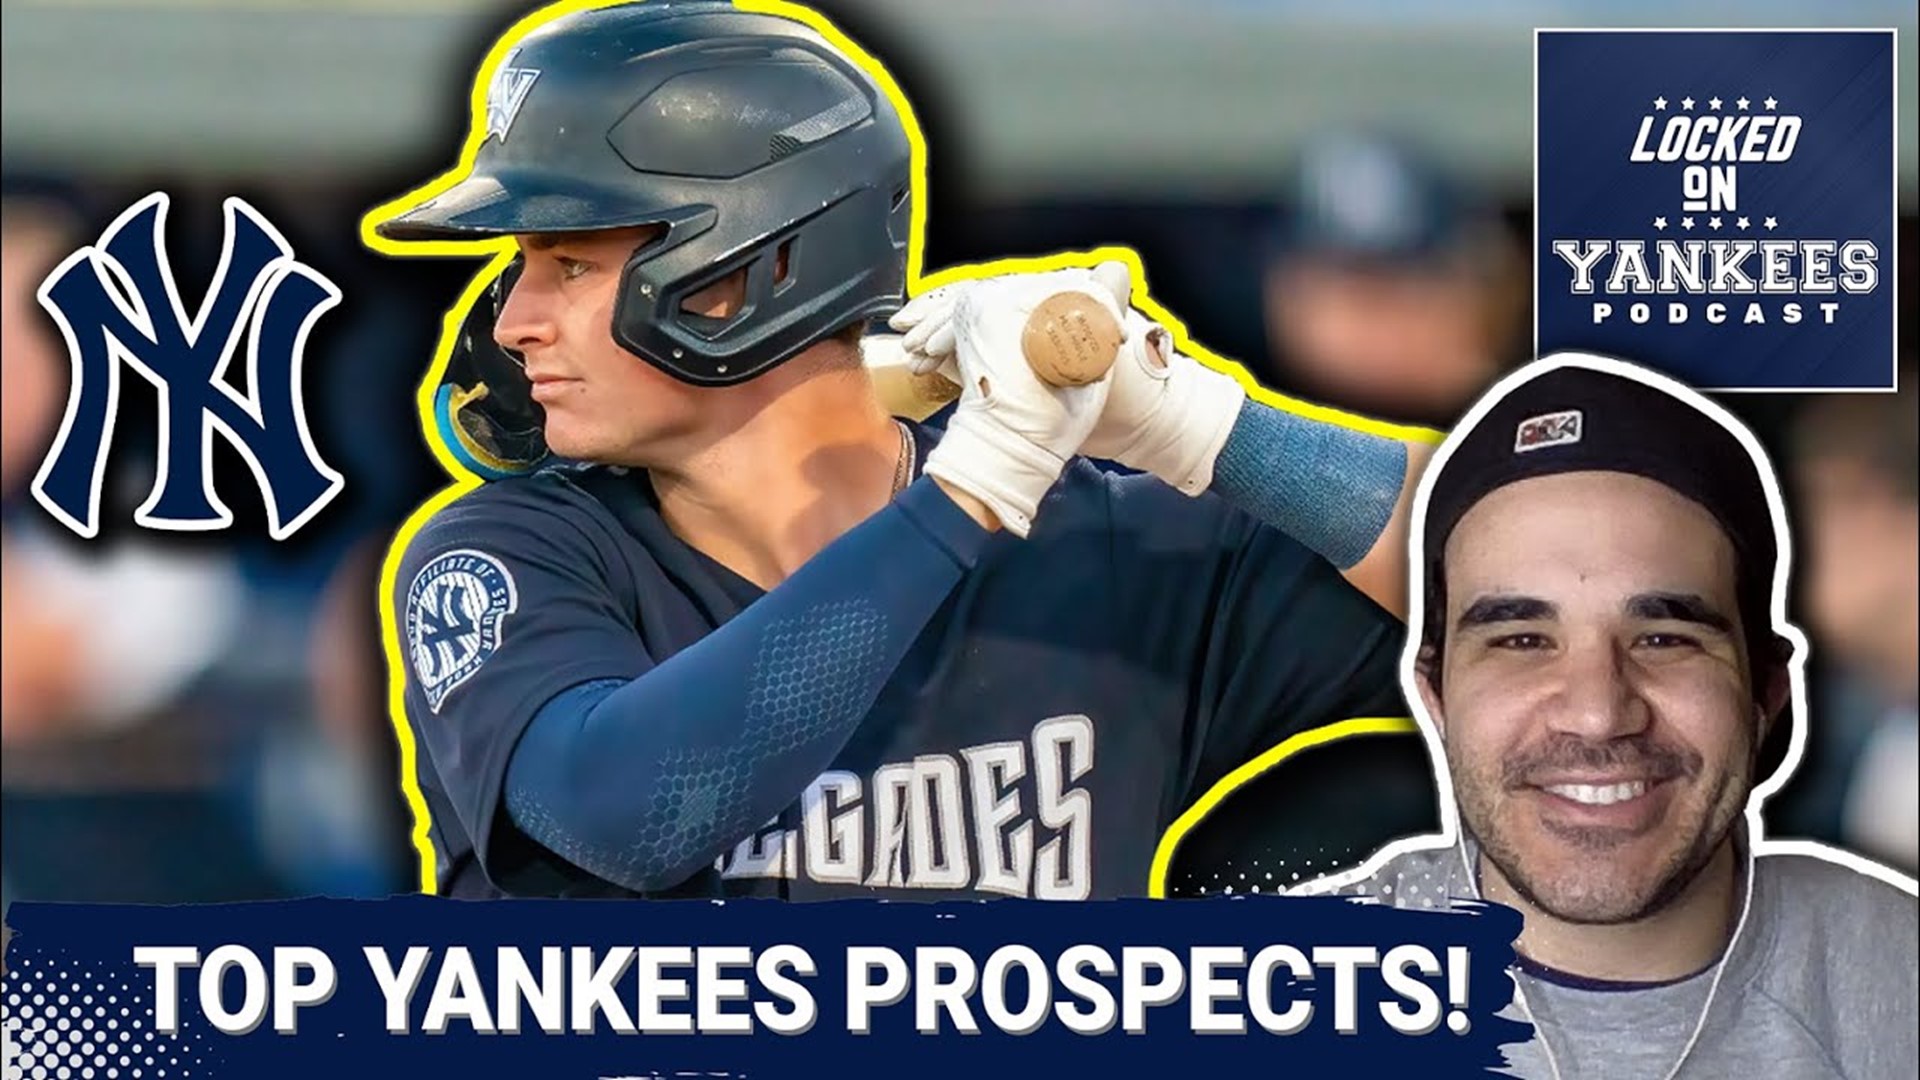 Stacey and Steve begin their pre-season tour around the New York Yankees Minor League system, first with a look at the Hudson Valley Renegades.